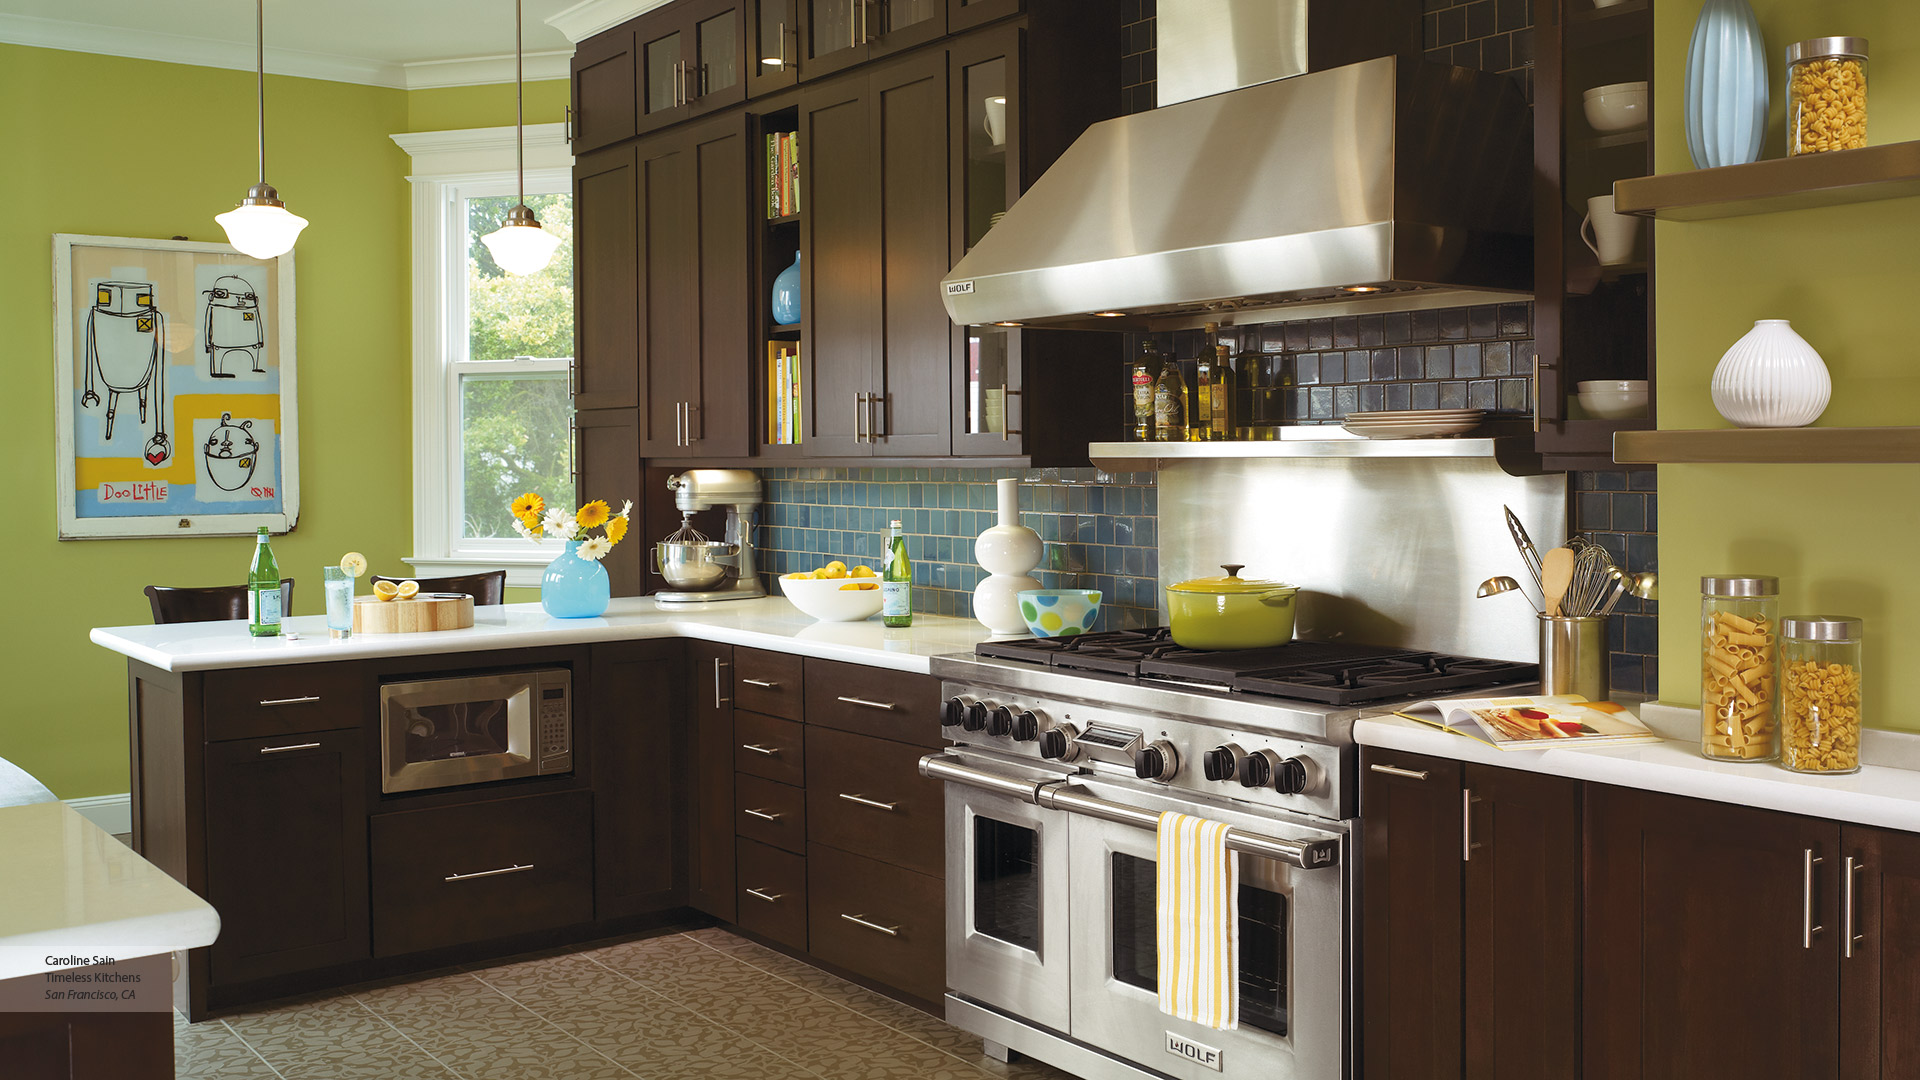 Shaker Style Cabinets in a Contemporary Kitchen - Omega
